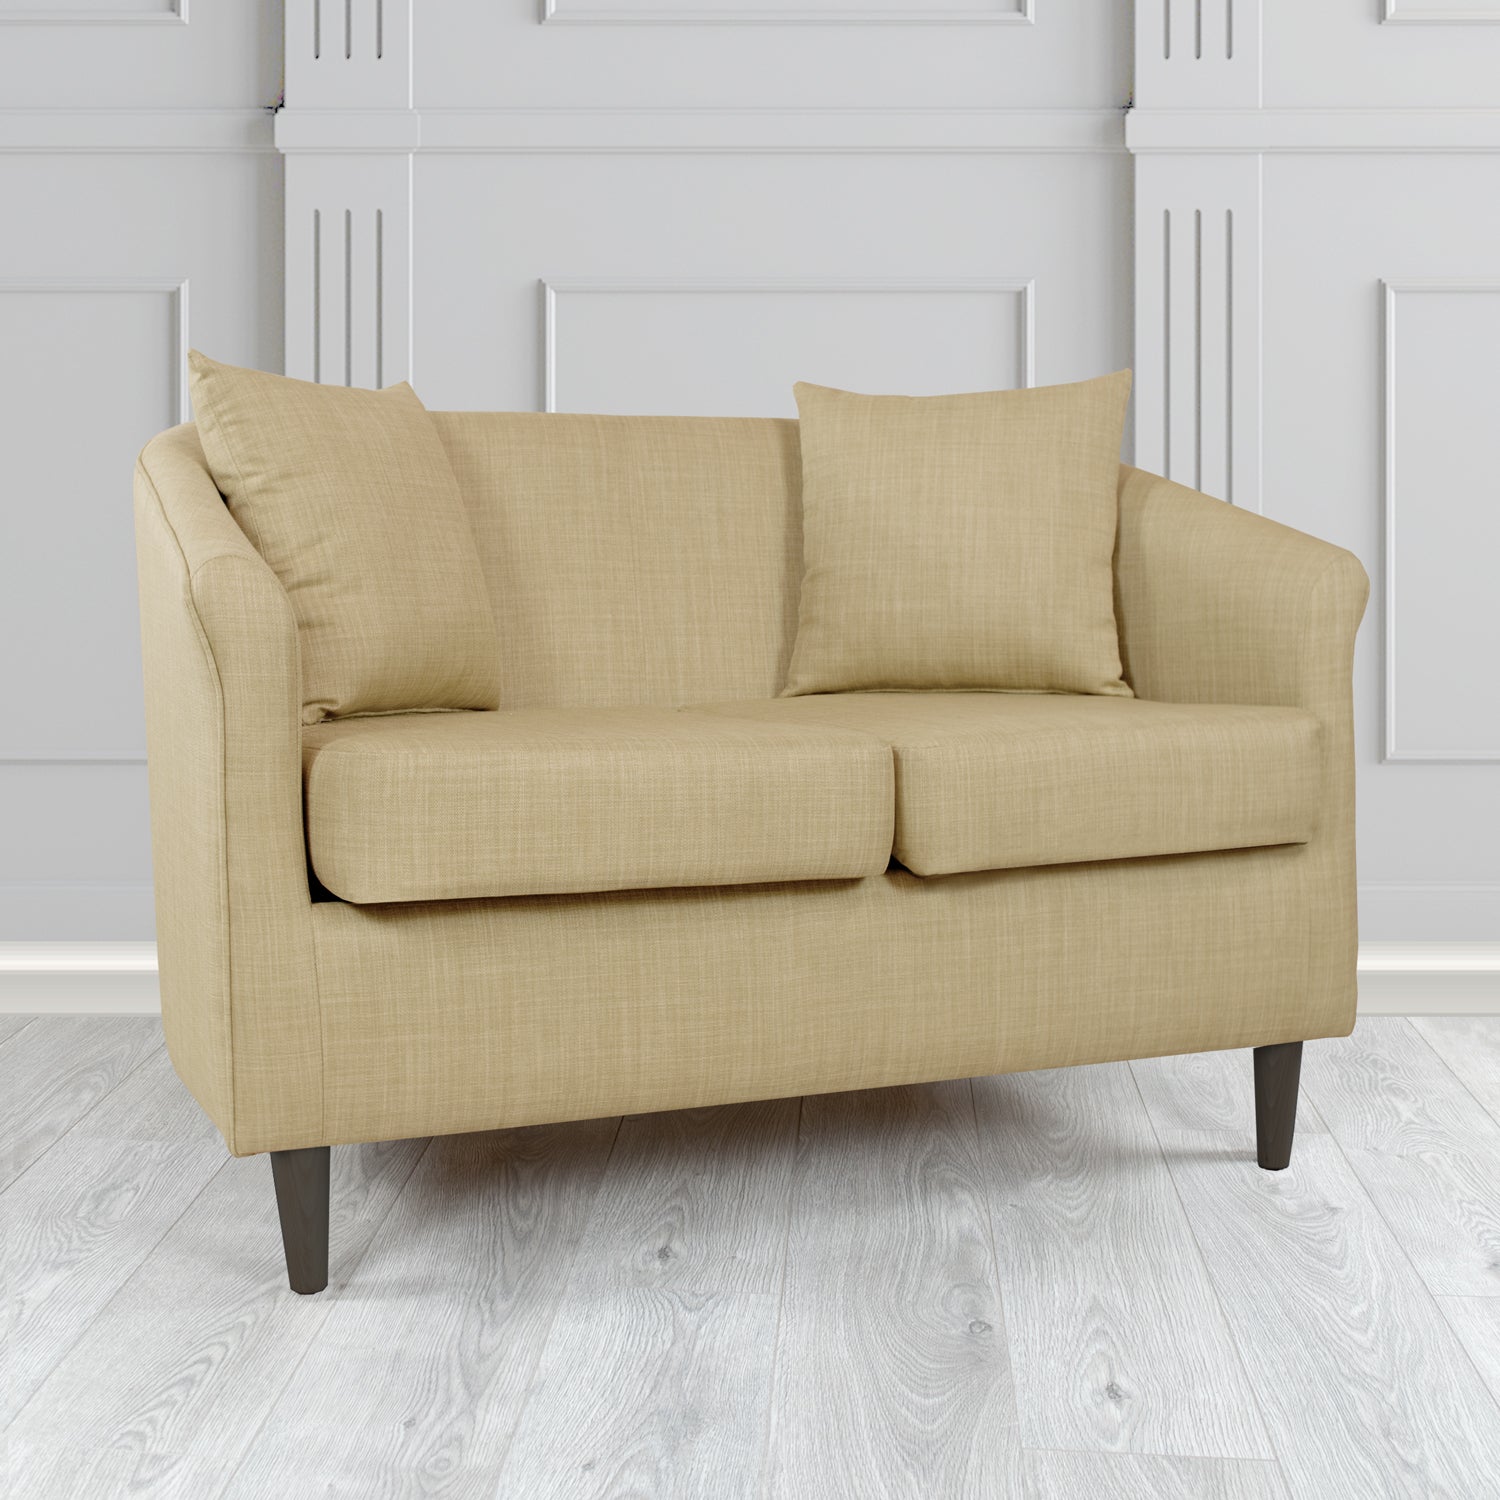 St Tropez Charles Mink Plain Linen Fabric 2 Seater Tub Sofa with Scatter Cushions - The Tub Chair Shop